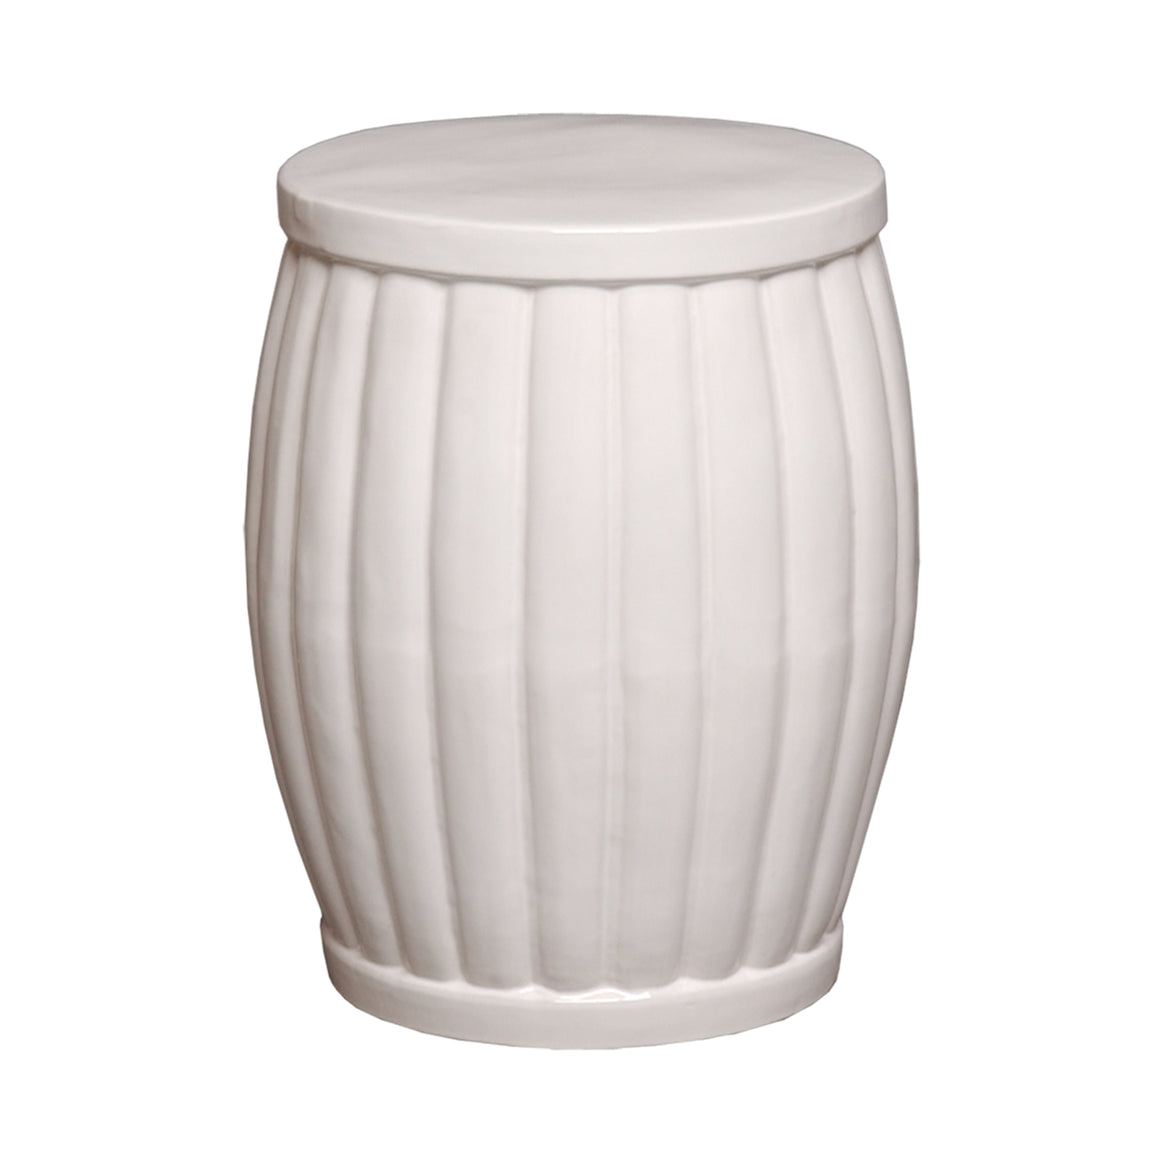 Fluted Garden Stool/Table with a White Glaze